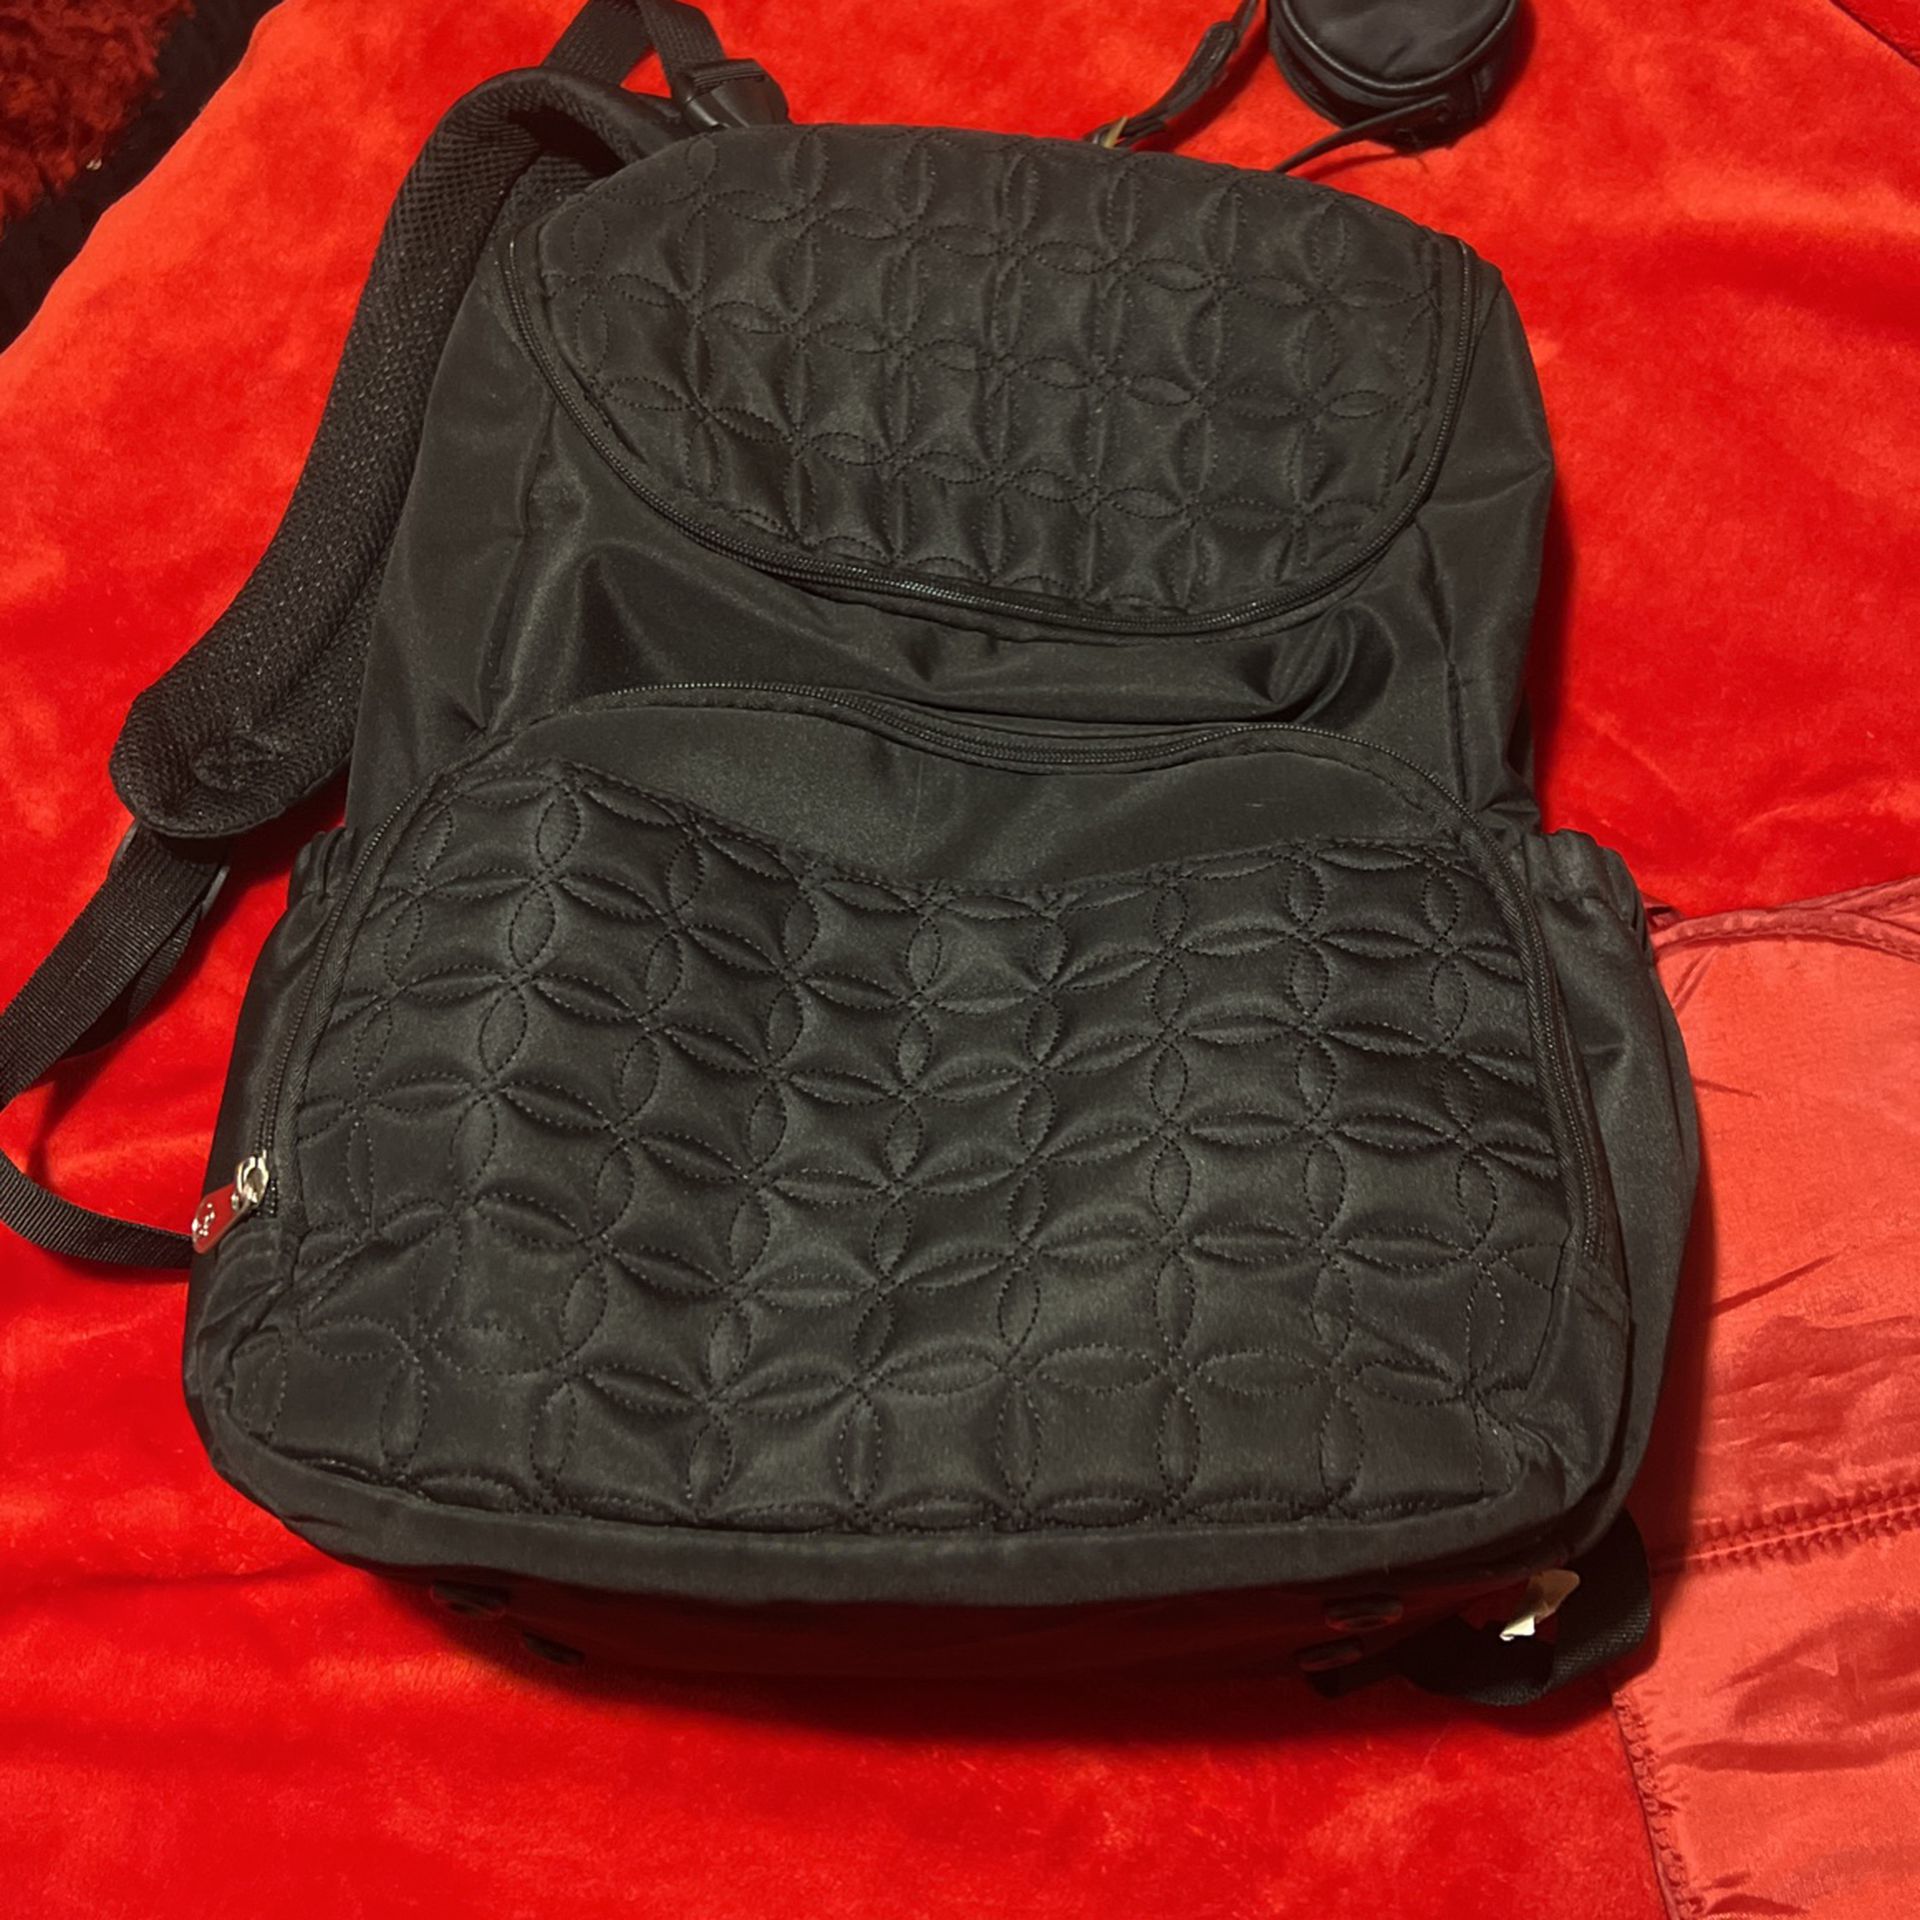 Madden Diaper Bag Backpack With Essentials for Sale in Pflugerville, TX - OfferUp